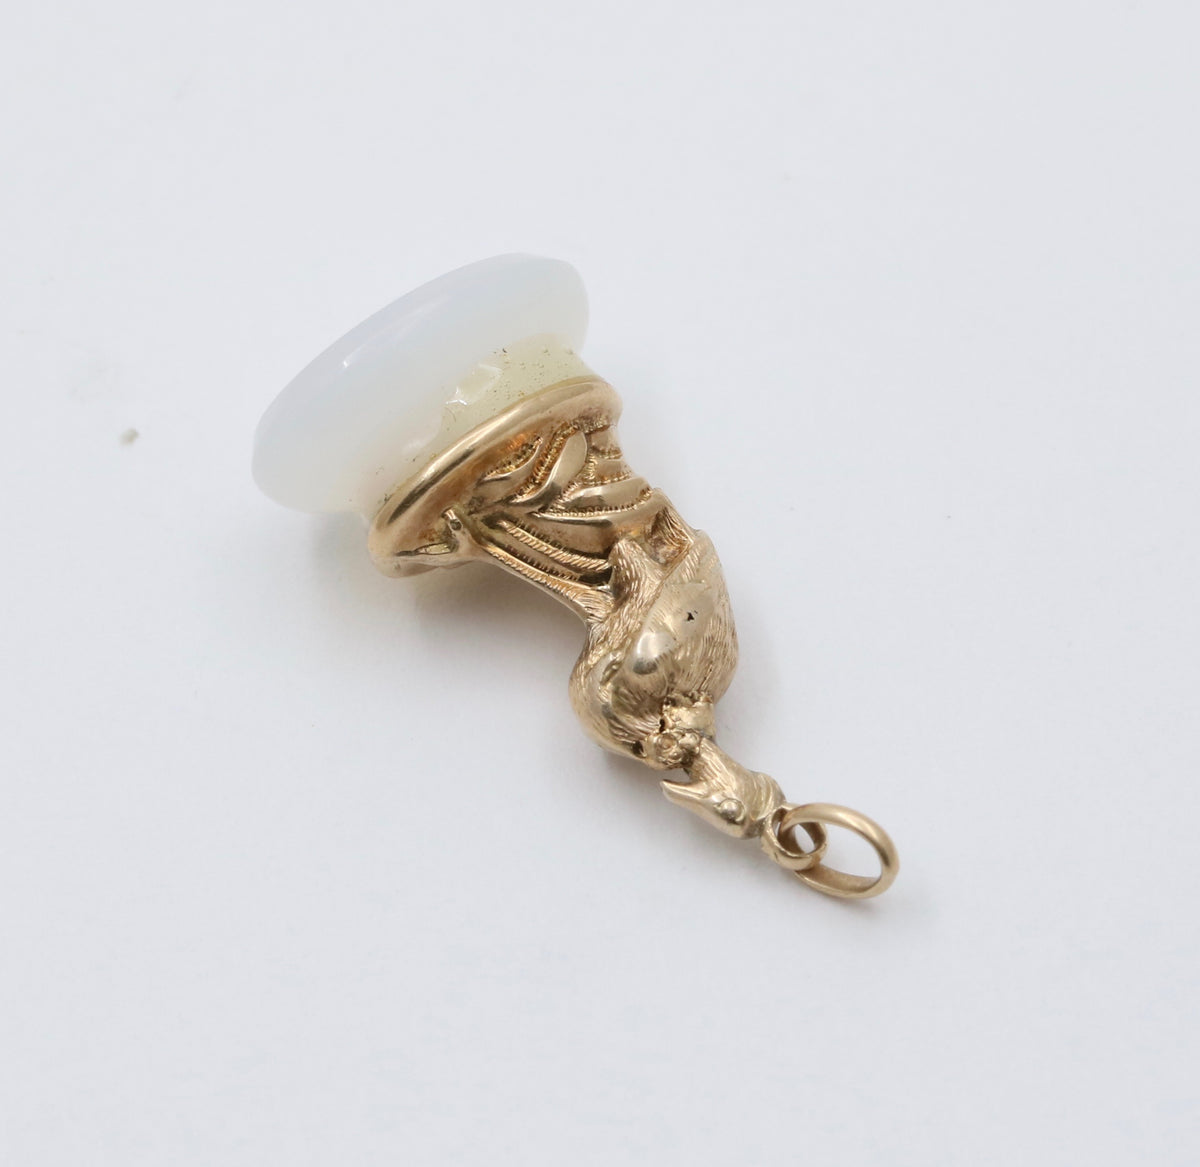 Antique 14K Gold and White Agate Peacock Fob, Charm